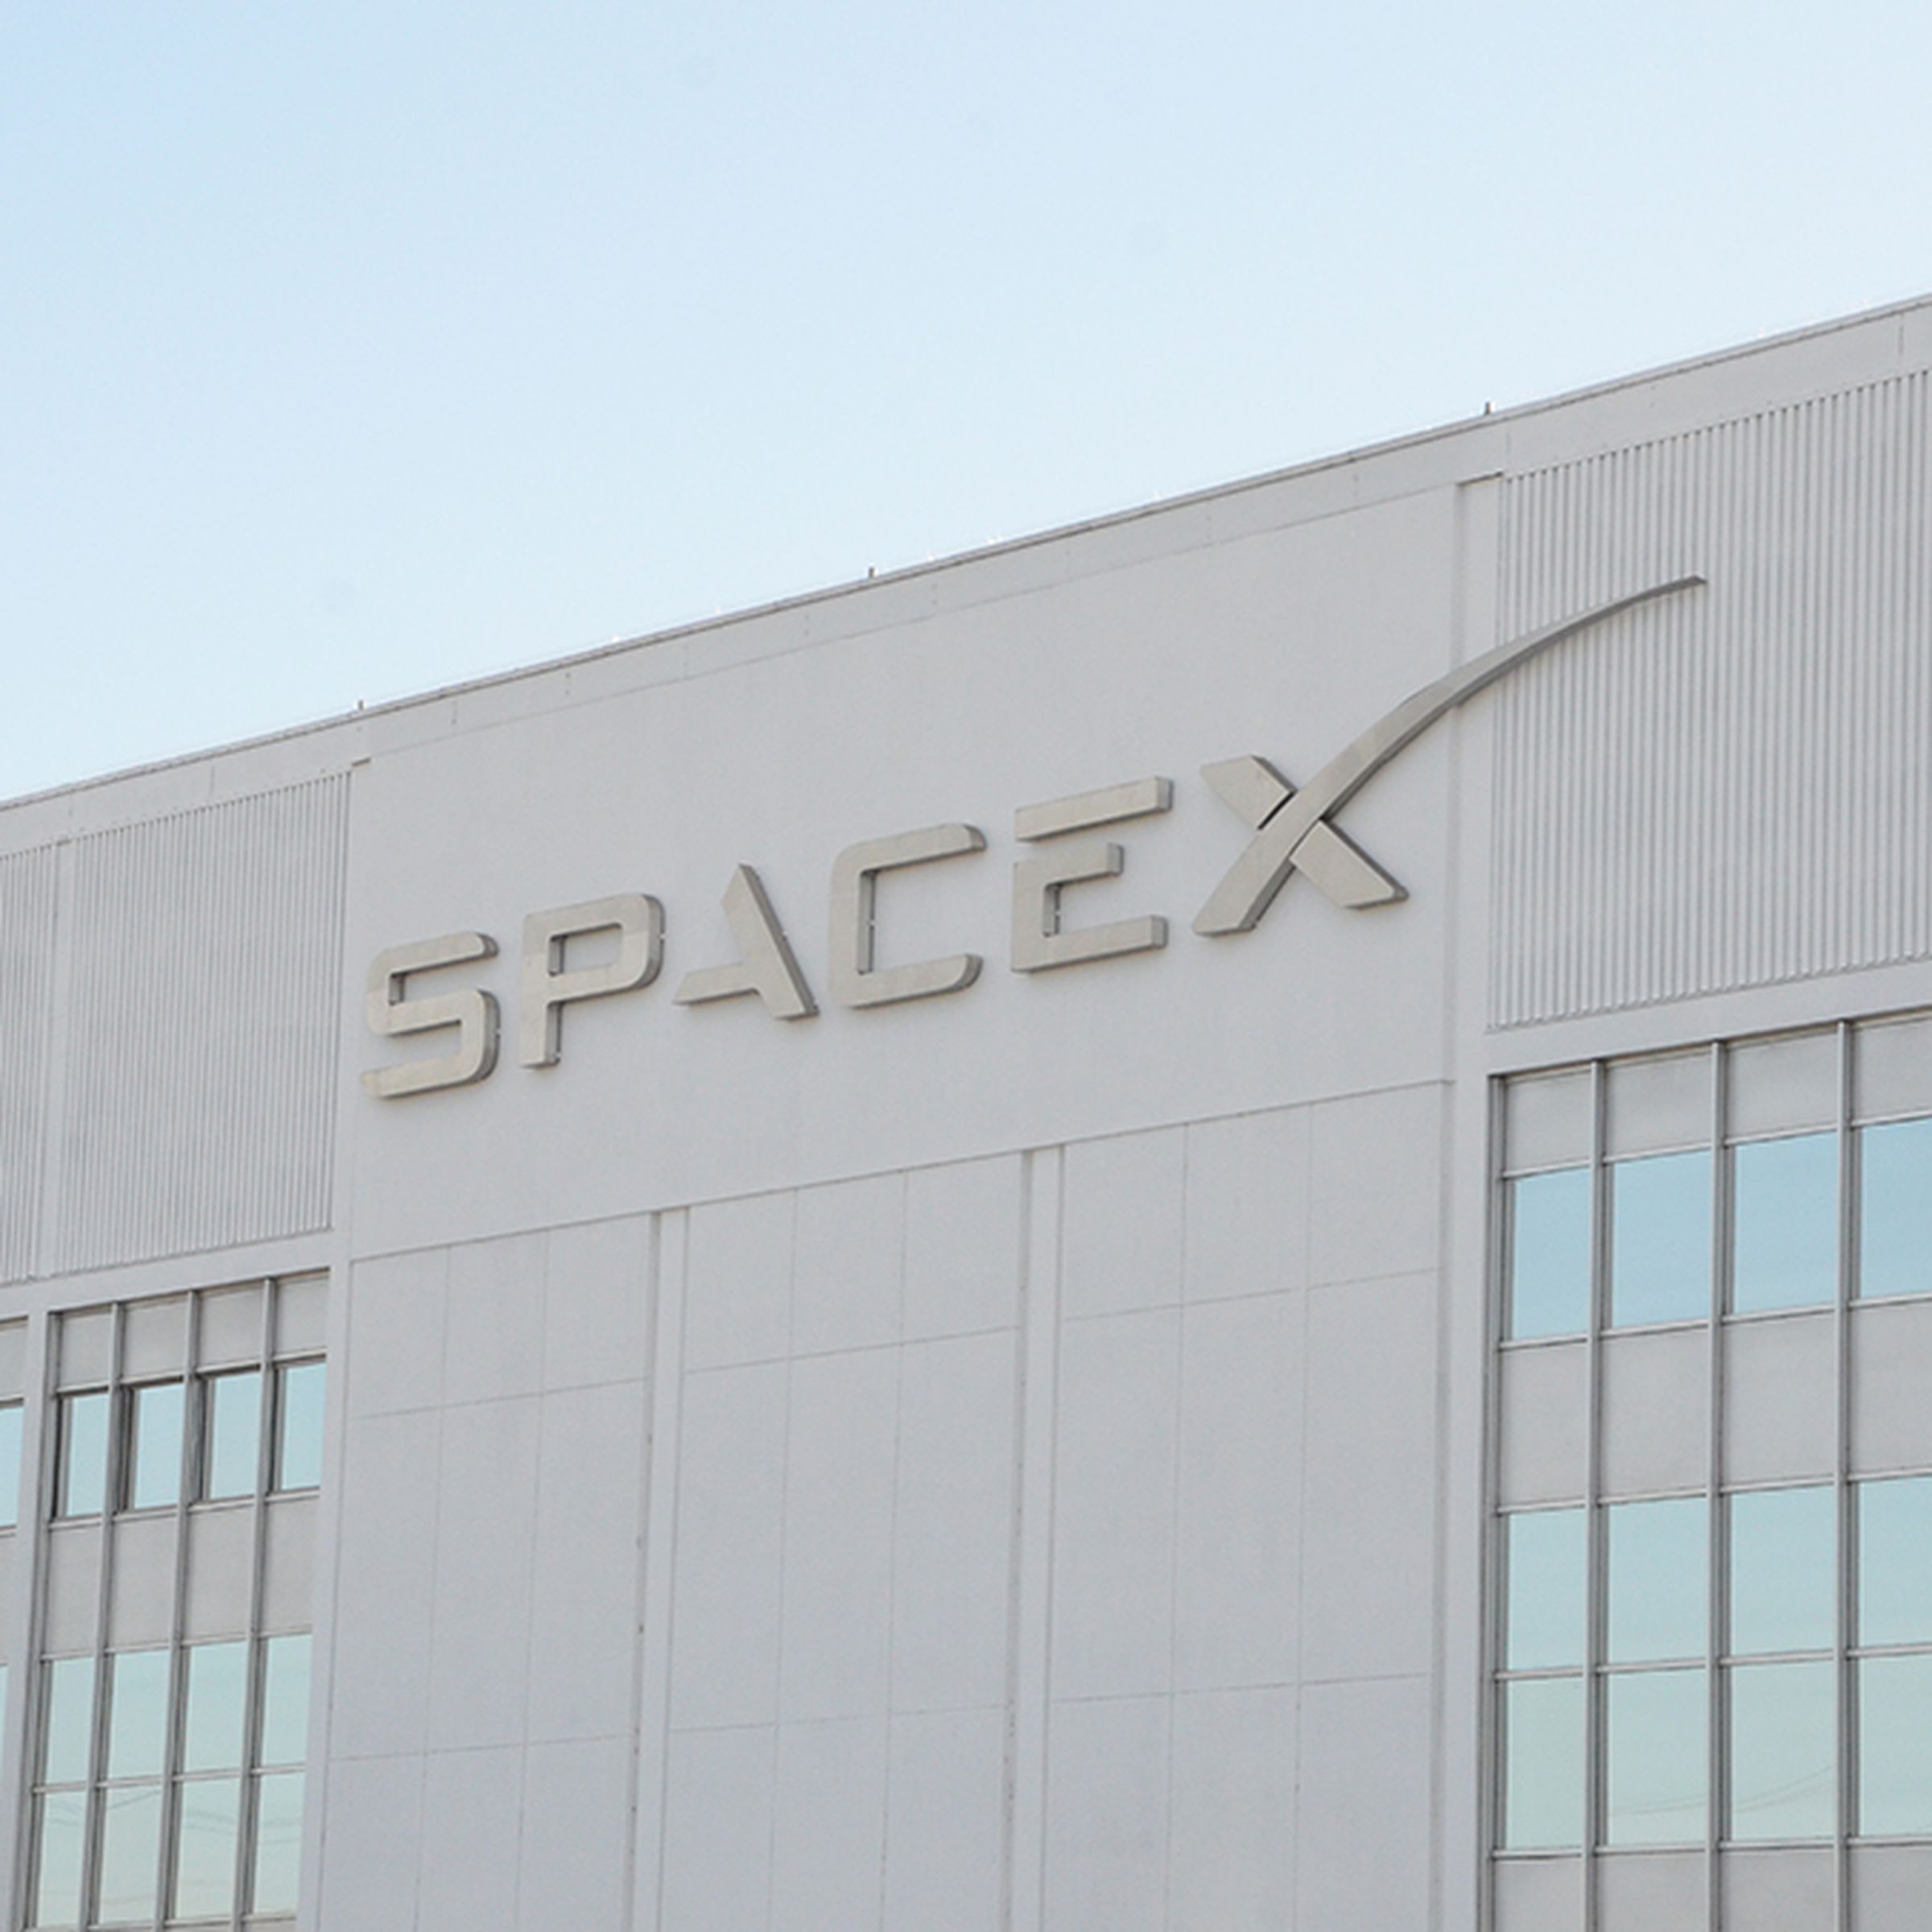 SpaceX logo on the side of a building